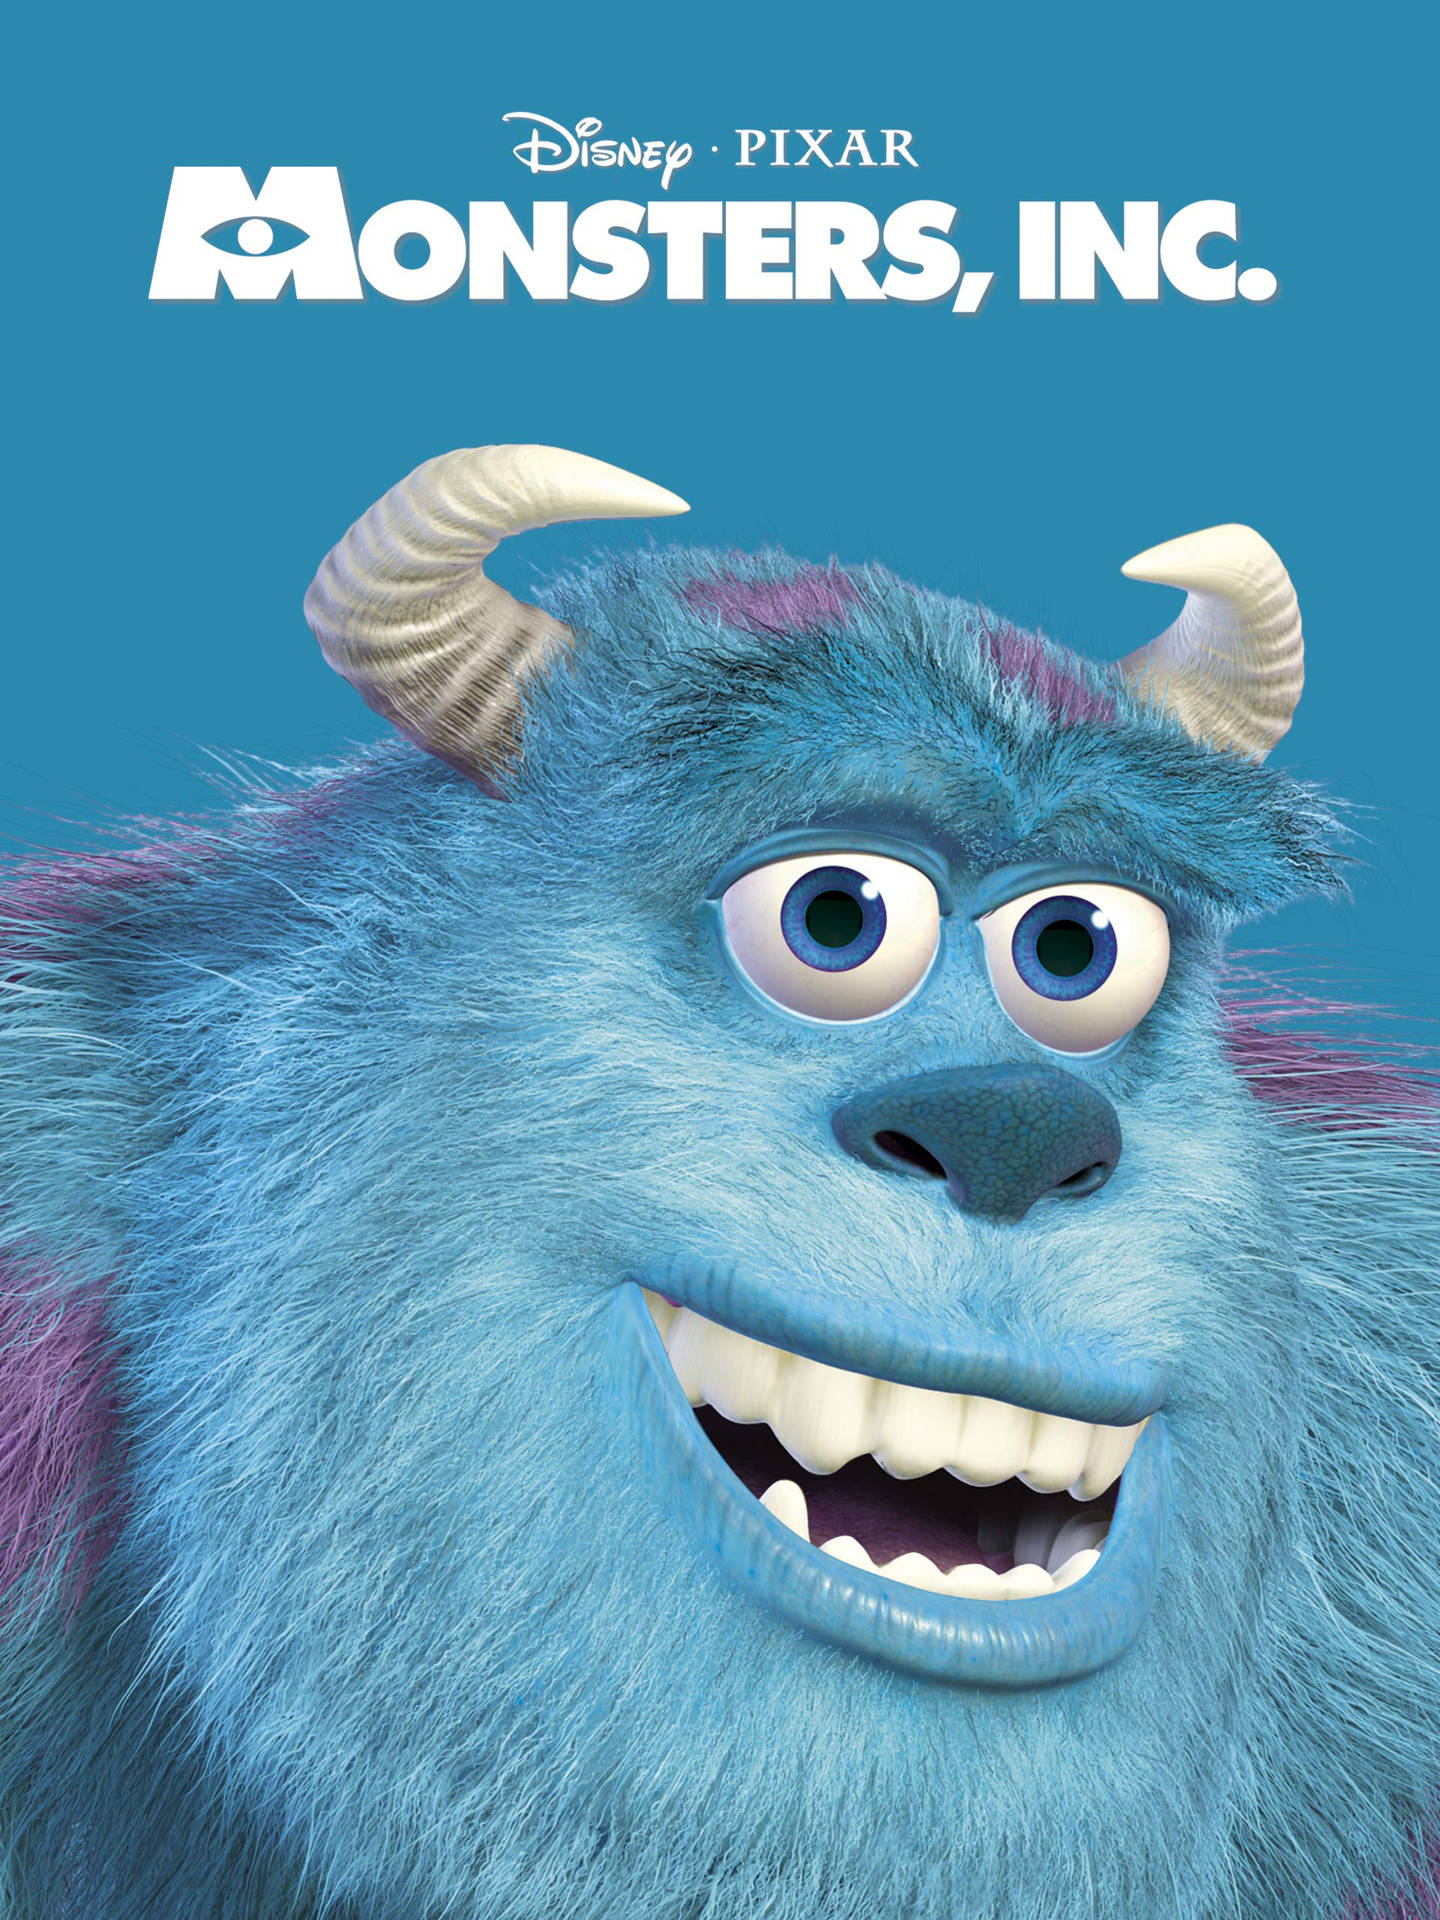 Sulley from Pixar's "Monsters, Inc." Portrayed in a High-resolution Portrait Wallpaper